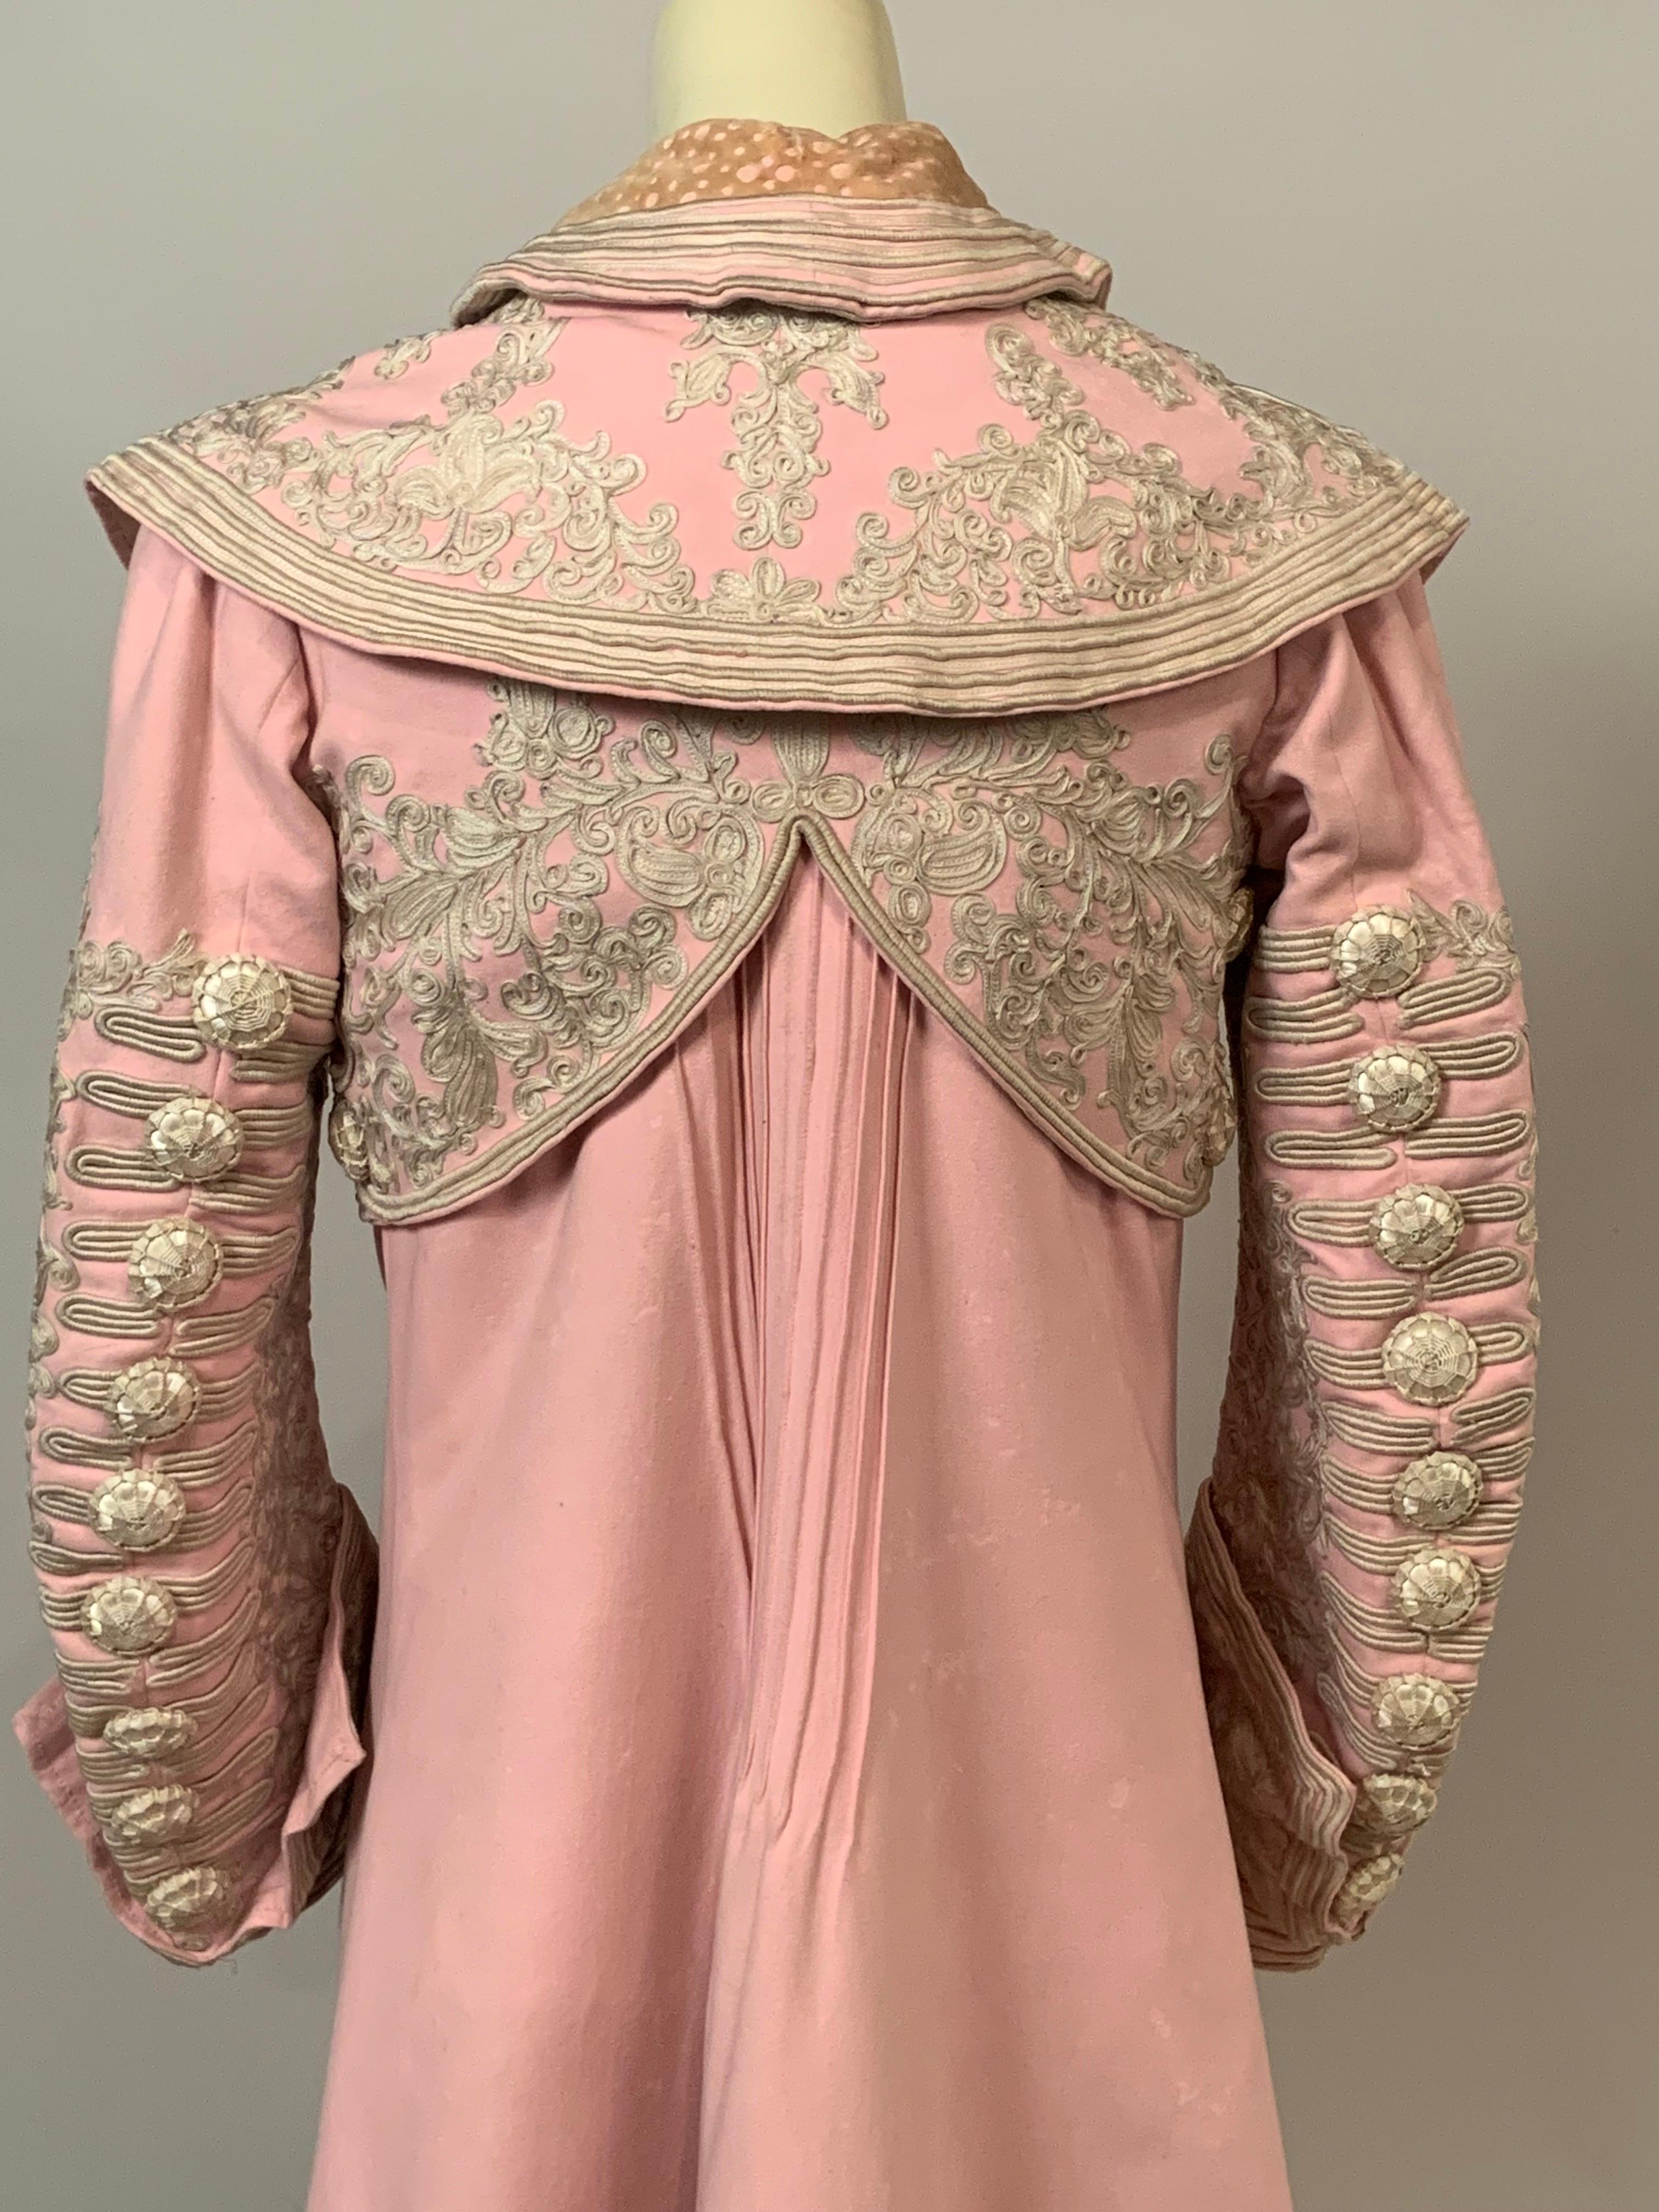 Bright Pink Wool Coat with Elaborate Ribbon Work and Button Trim Circa 1900 6